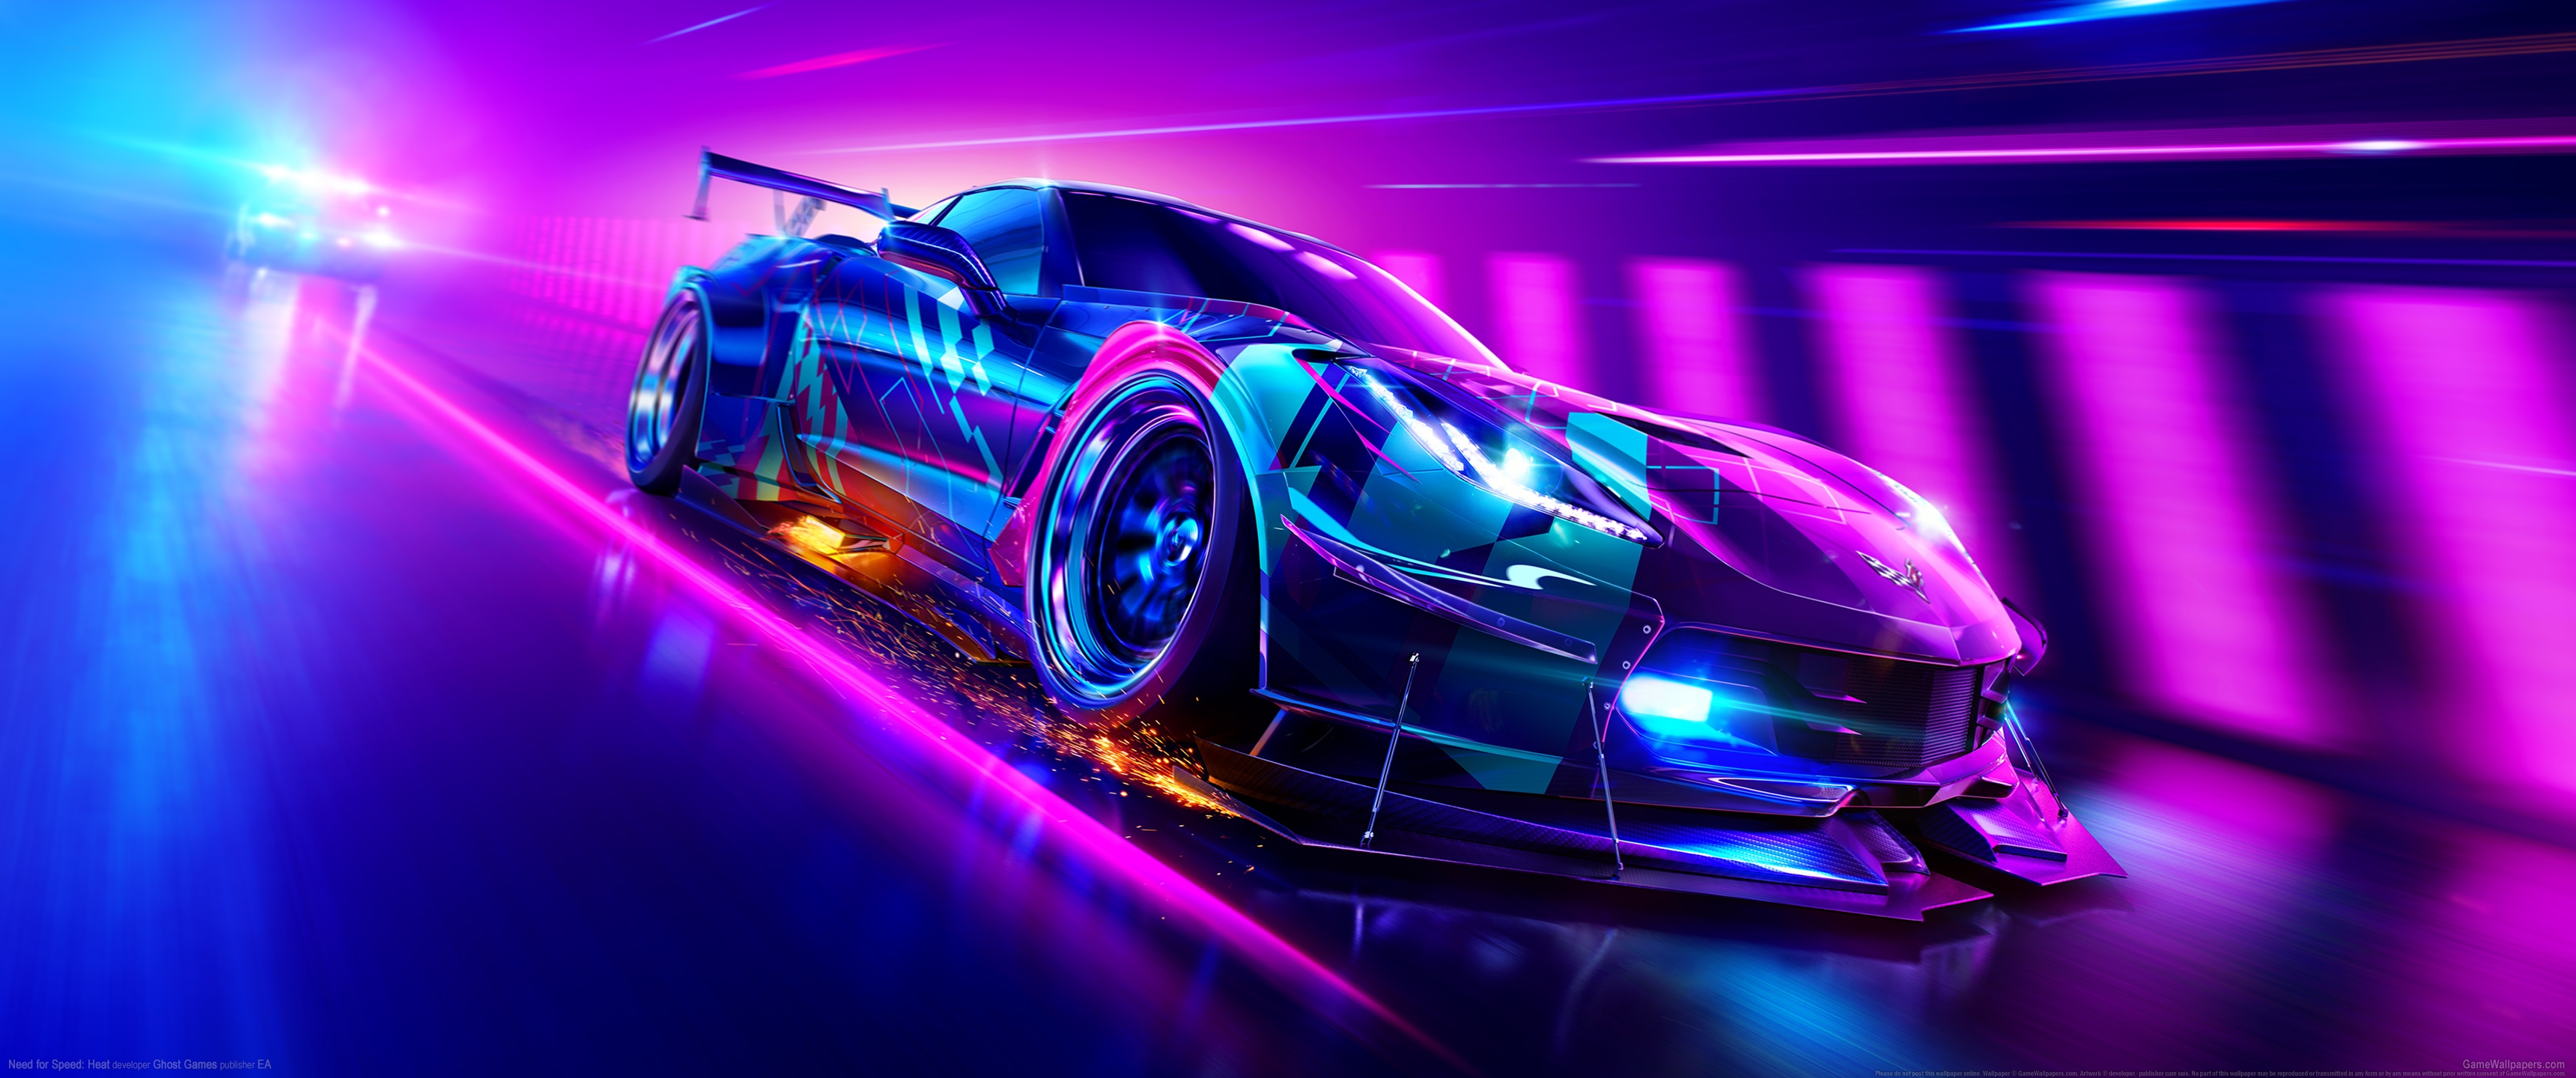 Need for Speed: Heat 3440x1440 wallpaper or background 03